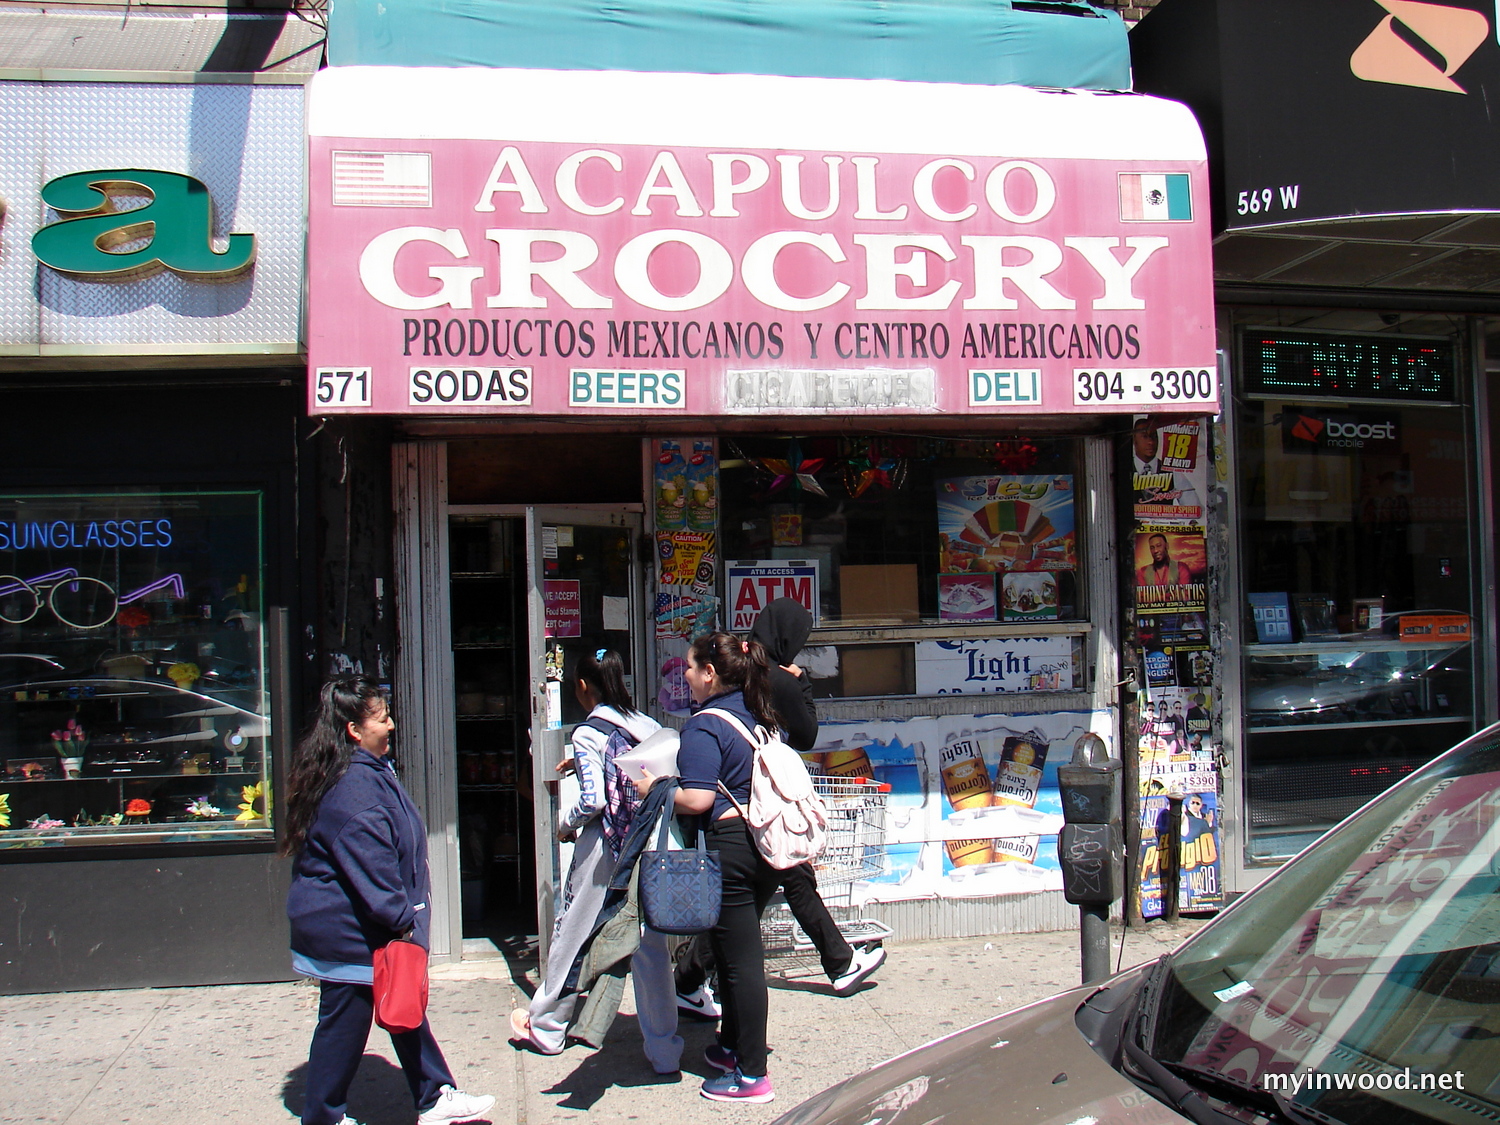 Acapulco Grocery, 571 West 207th Street in 2014.